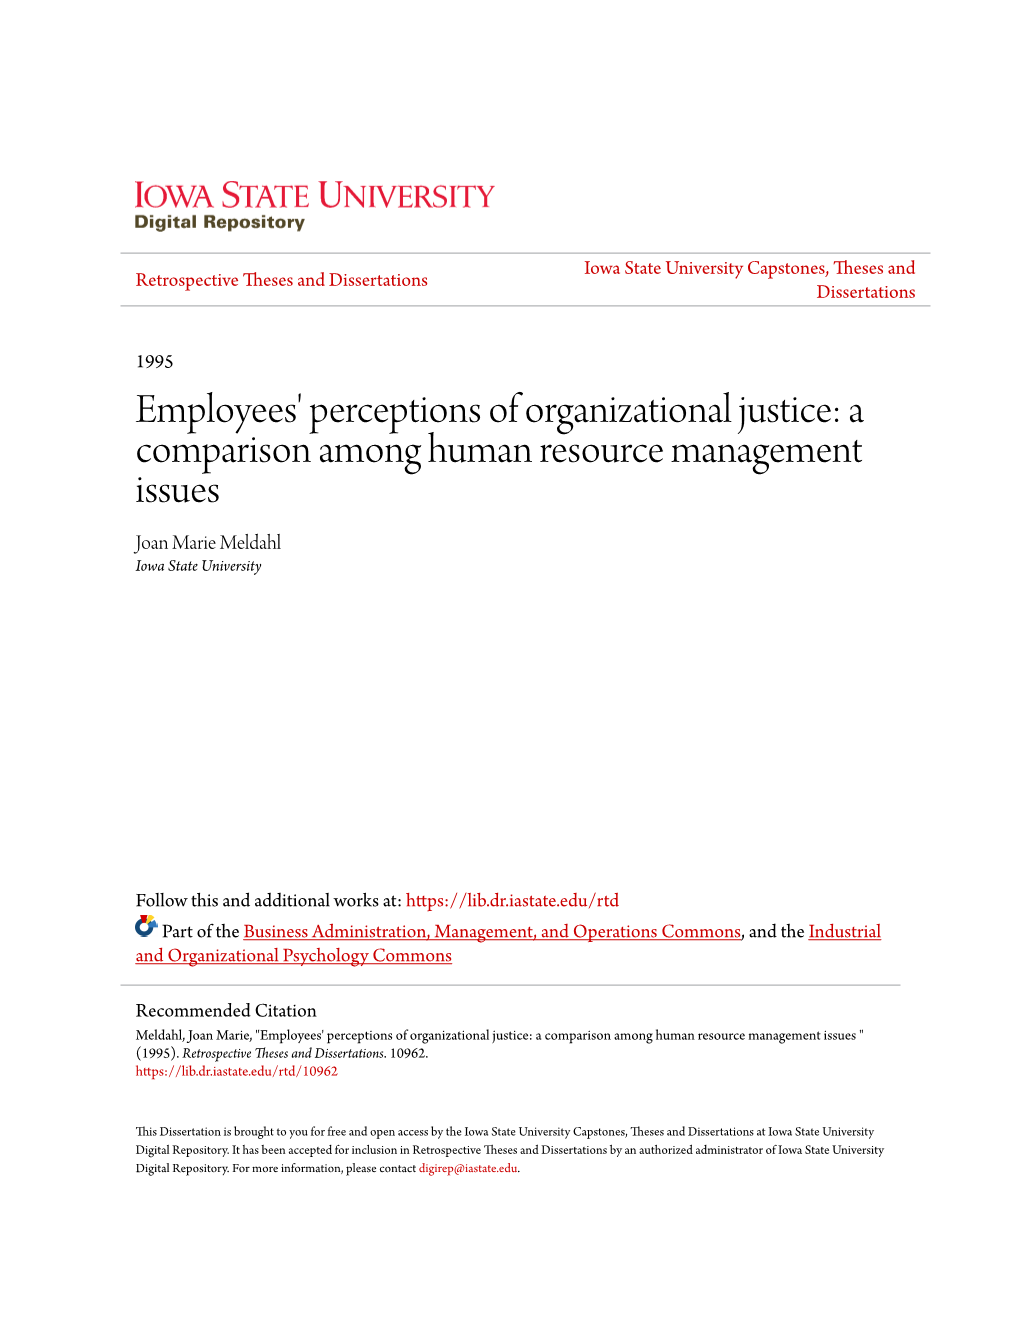 Employees' Perceptions of Organizational Justice: a Comparison Among Human Resource Management Issues Joan Marie Meldahl Iowa State University